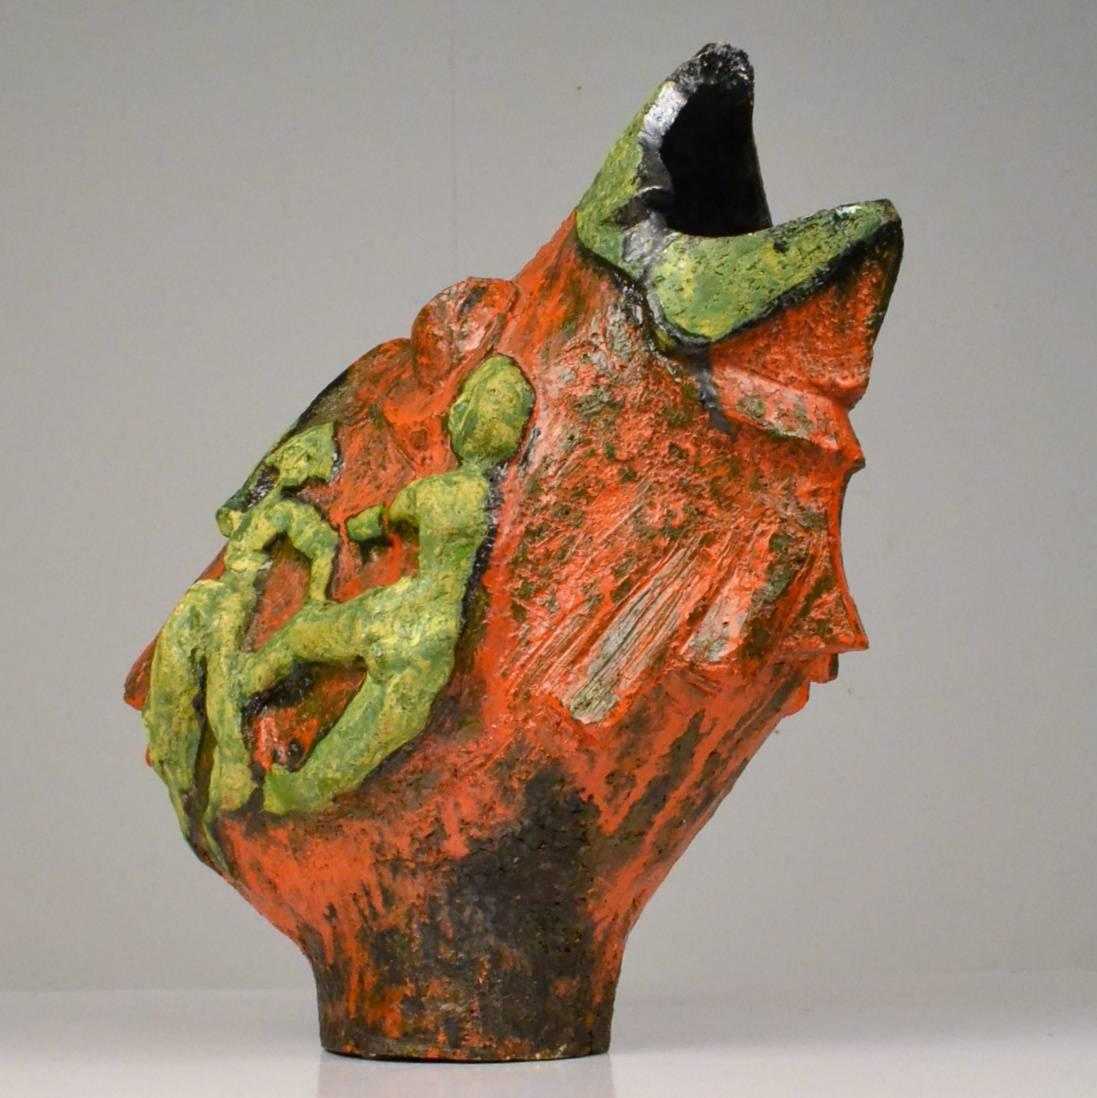 Expressive hand sculpted bird sculpture decorated with dancing female figurines on both sides, in orange and green glazed ceramic is signed A. Smit 1971, Netherlands. This hand formed ceramic sculpture is in the style of the famous Dutch Cobra